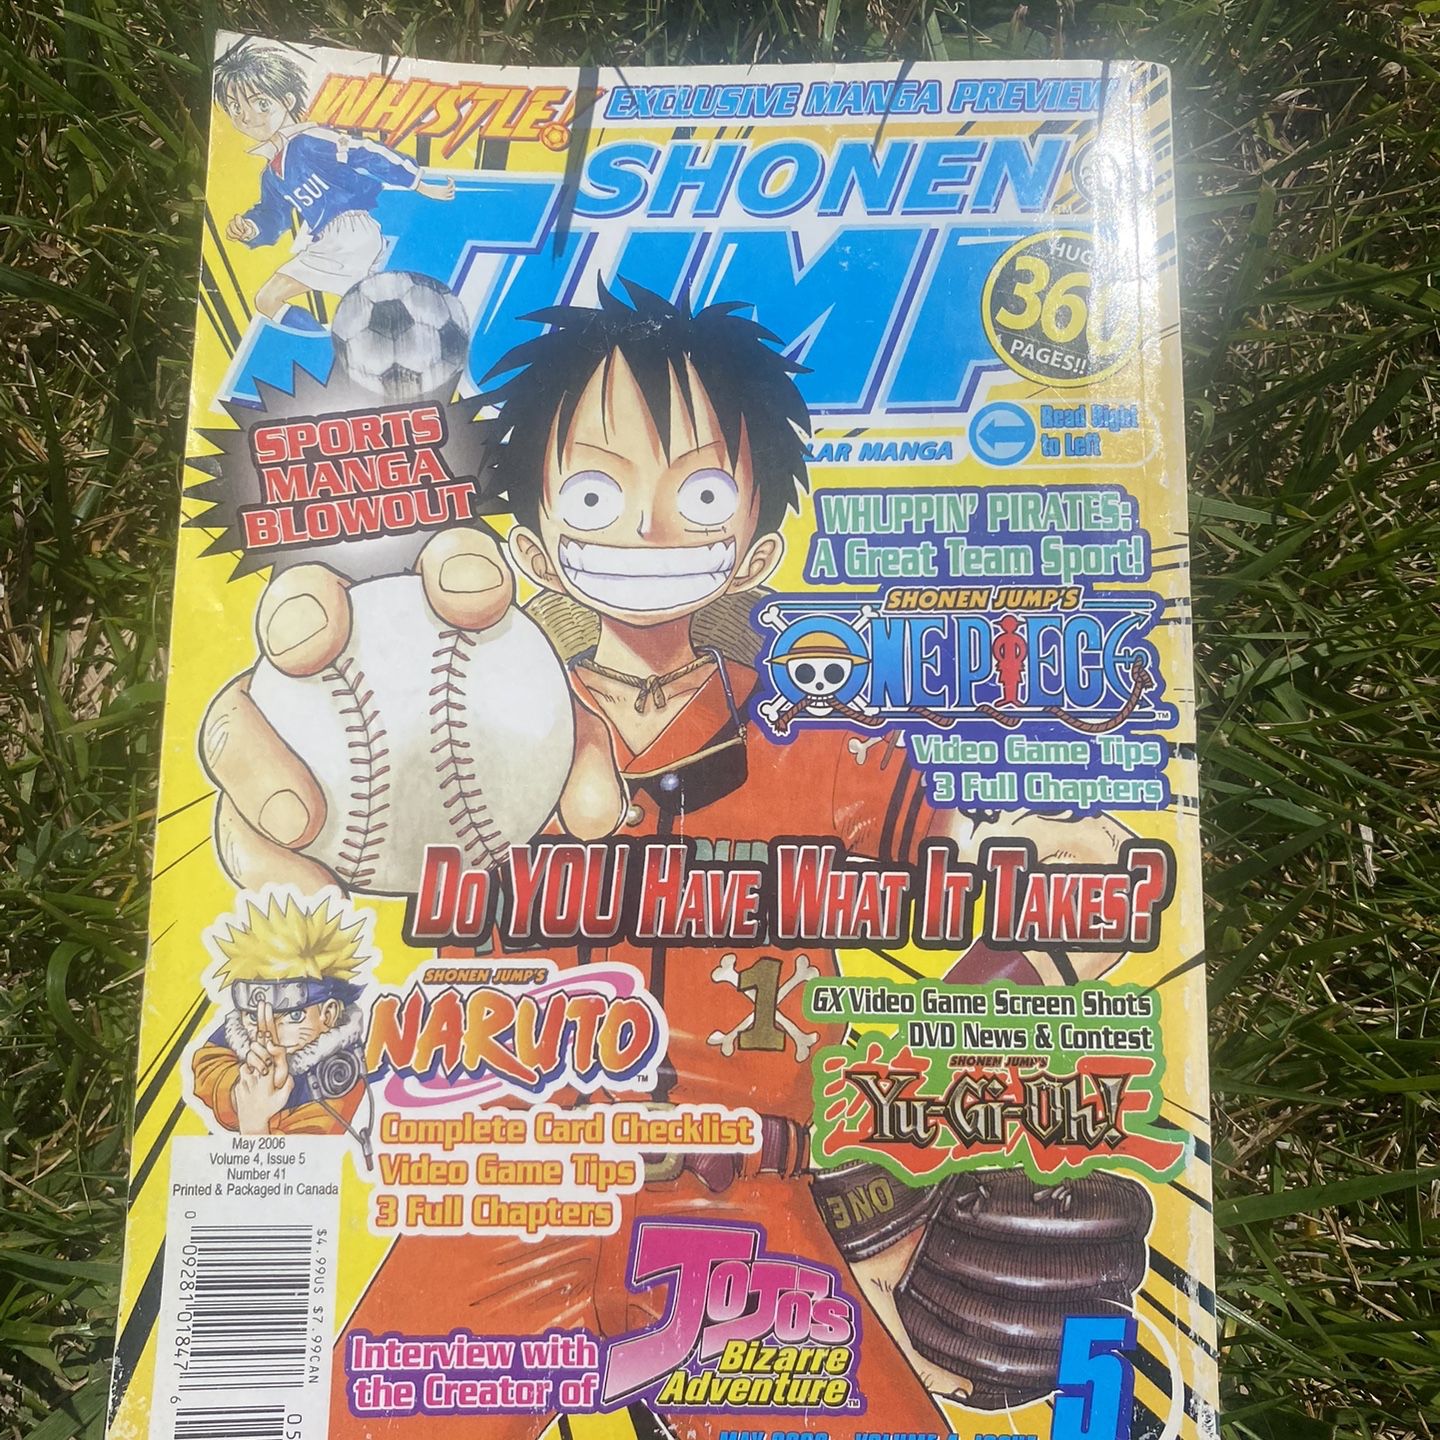 Shonen Jump Magazine May 2006 Volume 4 Issue 5 With Yu-Gi-Oh Card Ancient Lamp